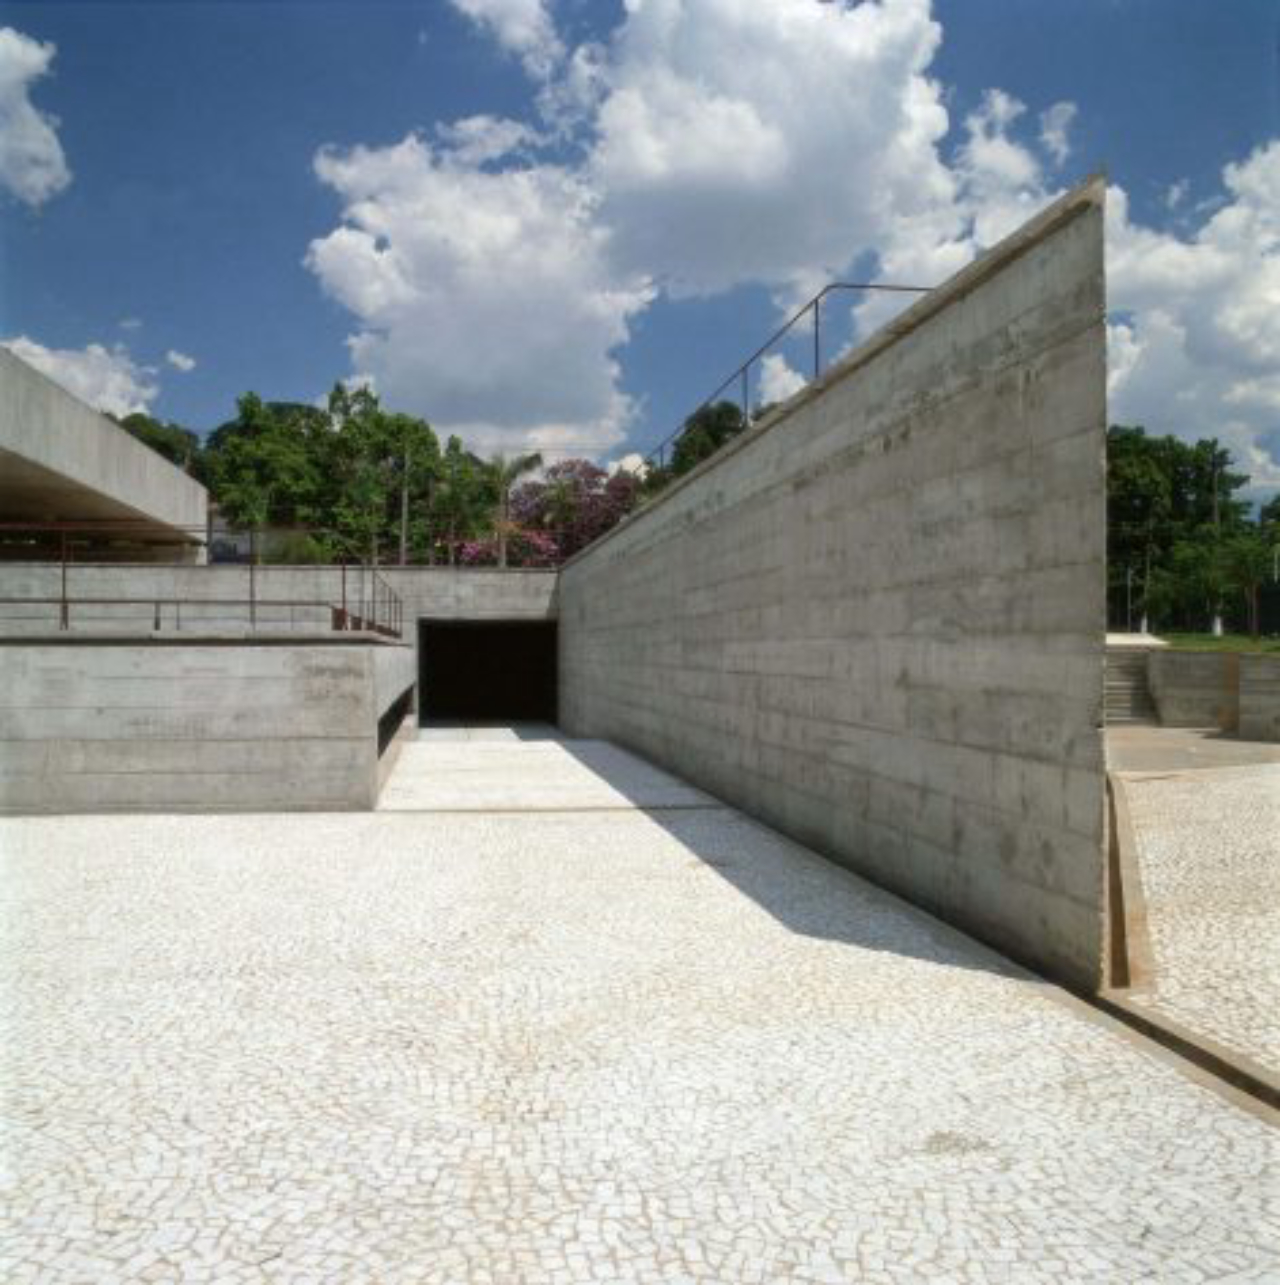 MUSEU - SÃO PAULO - CAD - THE MAIN ENTRANCE OF THE BRAZILIAN MUSEUM OF SCULPTURE IN SAO PAULO, DESIGNED IN 1988 BY BRAZILIAN ARCHITECT PAULO MENDES DA ROCHA IS SHOWN IN THIS UNDATED PUBLICITY PHOTOGRAPH. MENDES DA ROCHA HAS WON THE 2006 PRITZKER ARCHITECTURE PRIZE FOR HIS HALF CENTURY OF WORK, WHICH BROUGHT BEAUTY AND ORDER TO A GRITTY AND CHAOTIC SAO PAULO. MENDES DA ROCHA, 77, IS THE SECOND BRAZILIAN TO WIN THE SO-CALLED 'NOBEL FOR ARCHITECTURE' AFTER OSCAR NIEMEYER WON THE AWARD IN 1988. REUTERS/NELSON KON/PRITZKER ARCHITECTURE PRIZE/HANDOUT